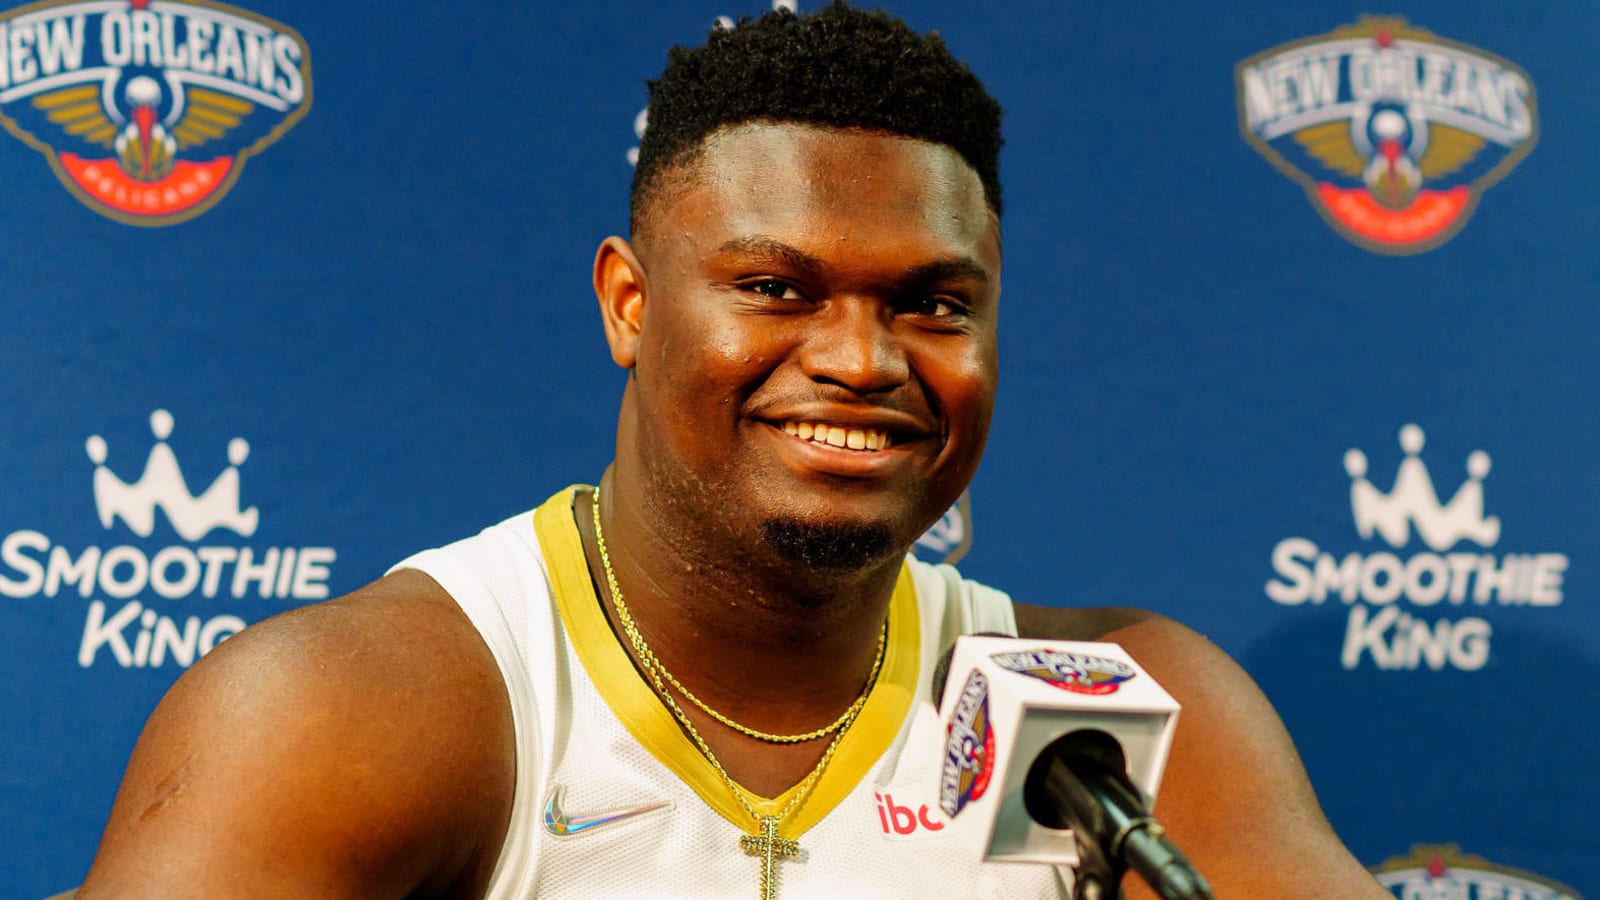 Pelicans expect Zion to be ready for season after surgery